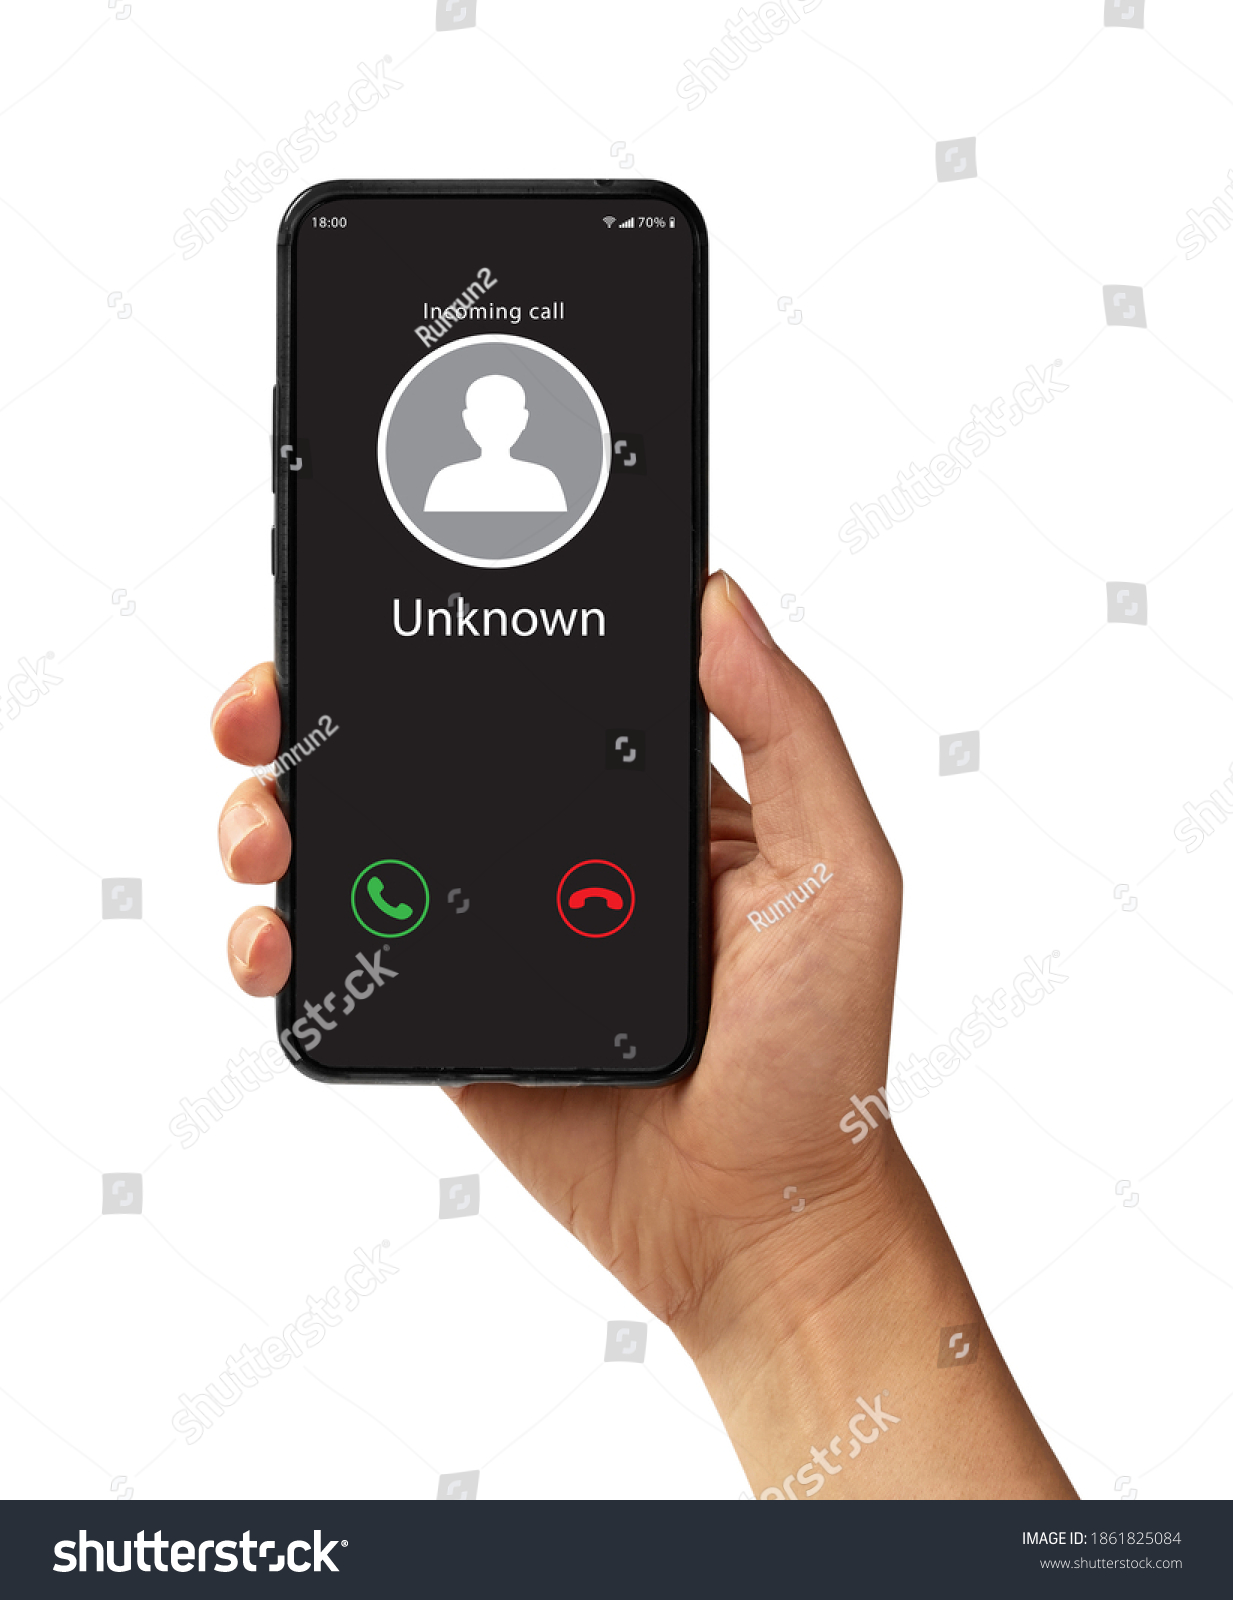 Hand holding the black smartphone with Unknown incoming call. #1861825084